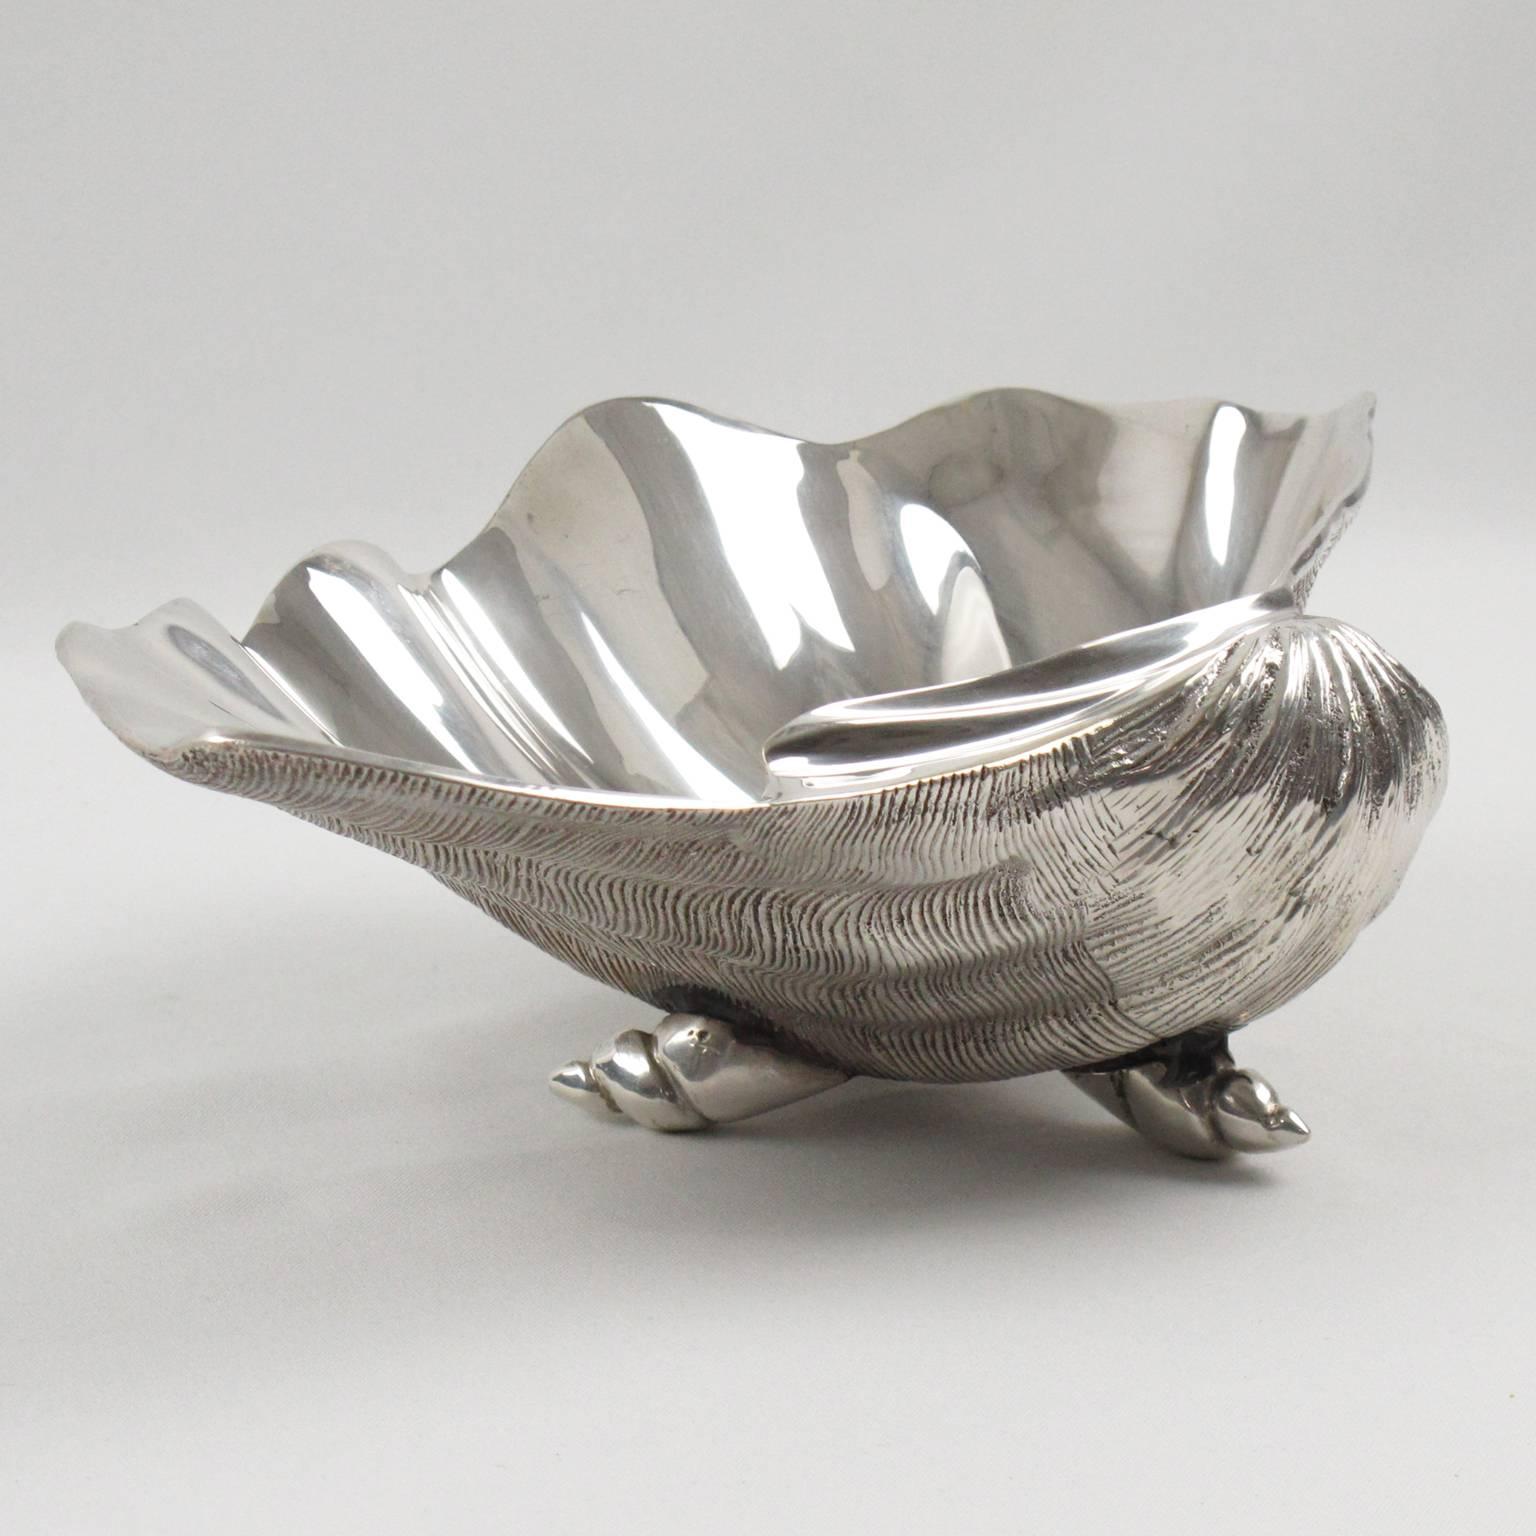 Very elegant Italian midcentury silver plate clam shell bowl. Large dimensional shape with textured pattern on the outside and shiny polished finish on the inside. Three tiny shells as feet. No visible marking.
Measurements: 10.63 in. wide (27 cm)